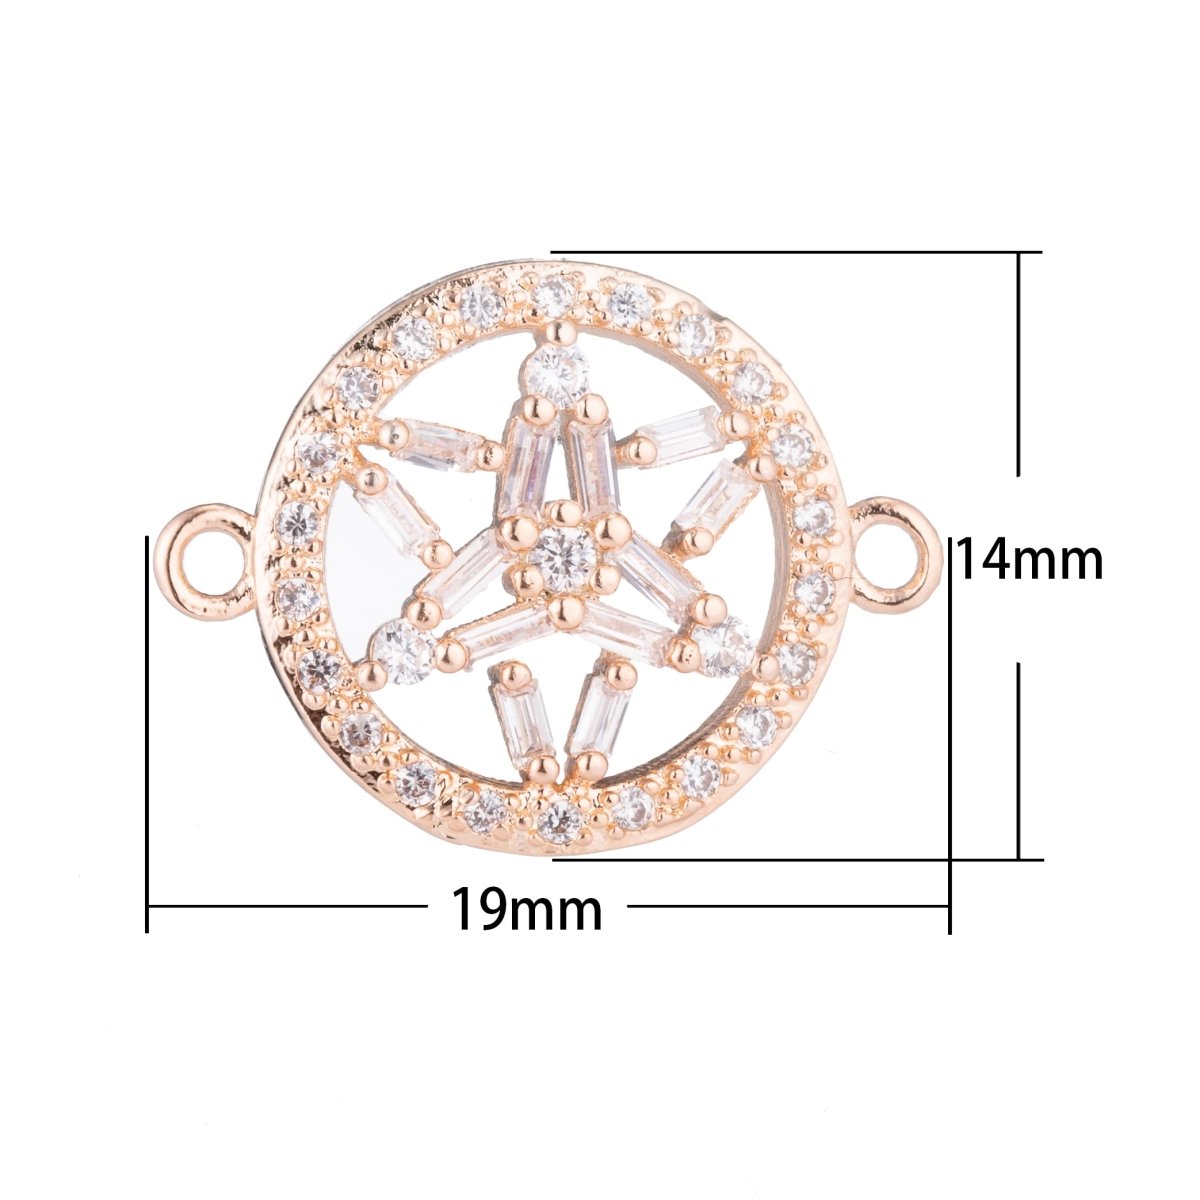 Gold Star, Celestial, Starry, DIY Handcrafted Ladies Gift, Cubic Zirconia Bracelet Charm, Necklace Pendant, Findings for Jewelry Making, F-156 - DLUXCA